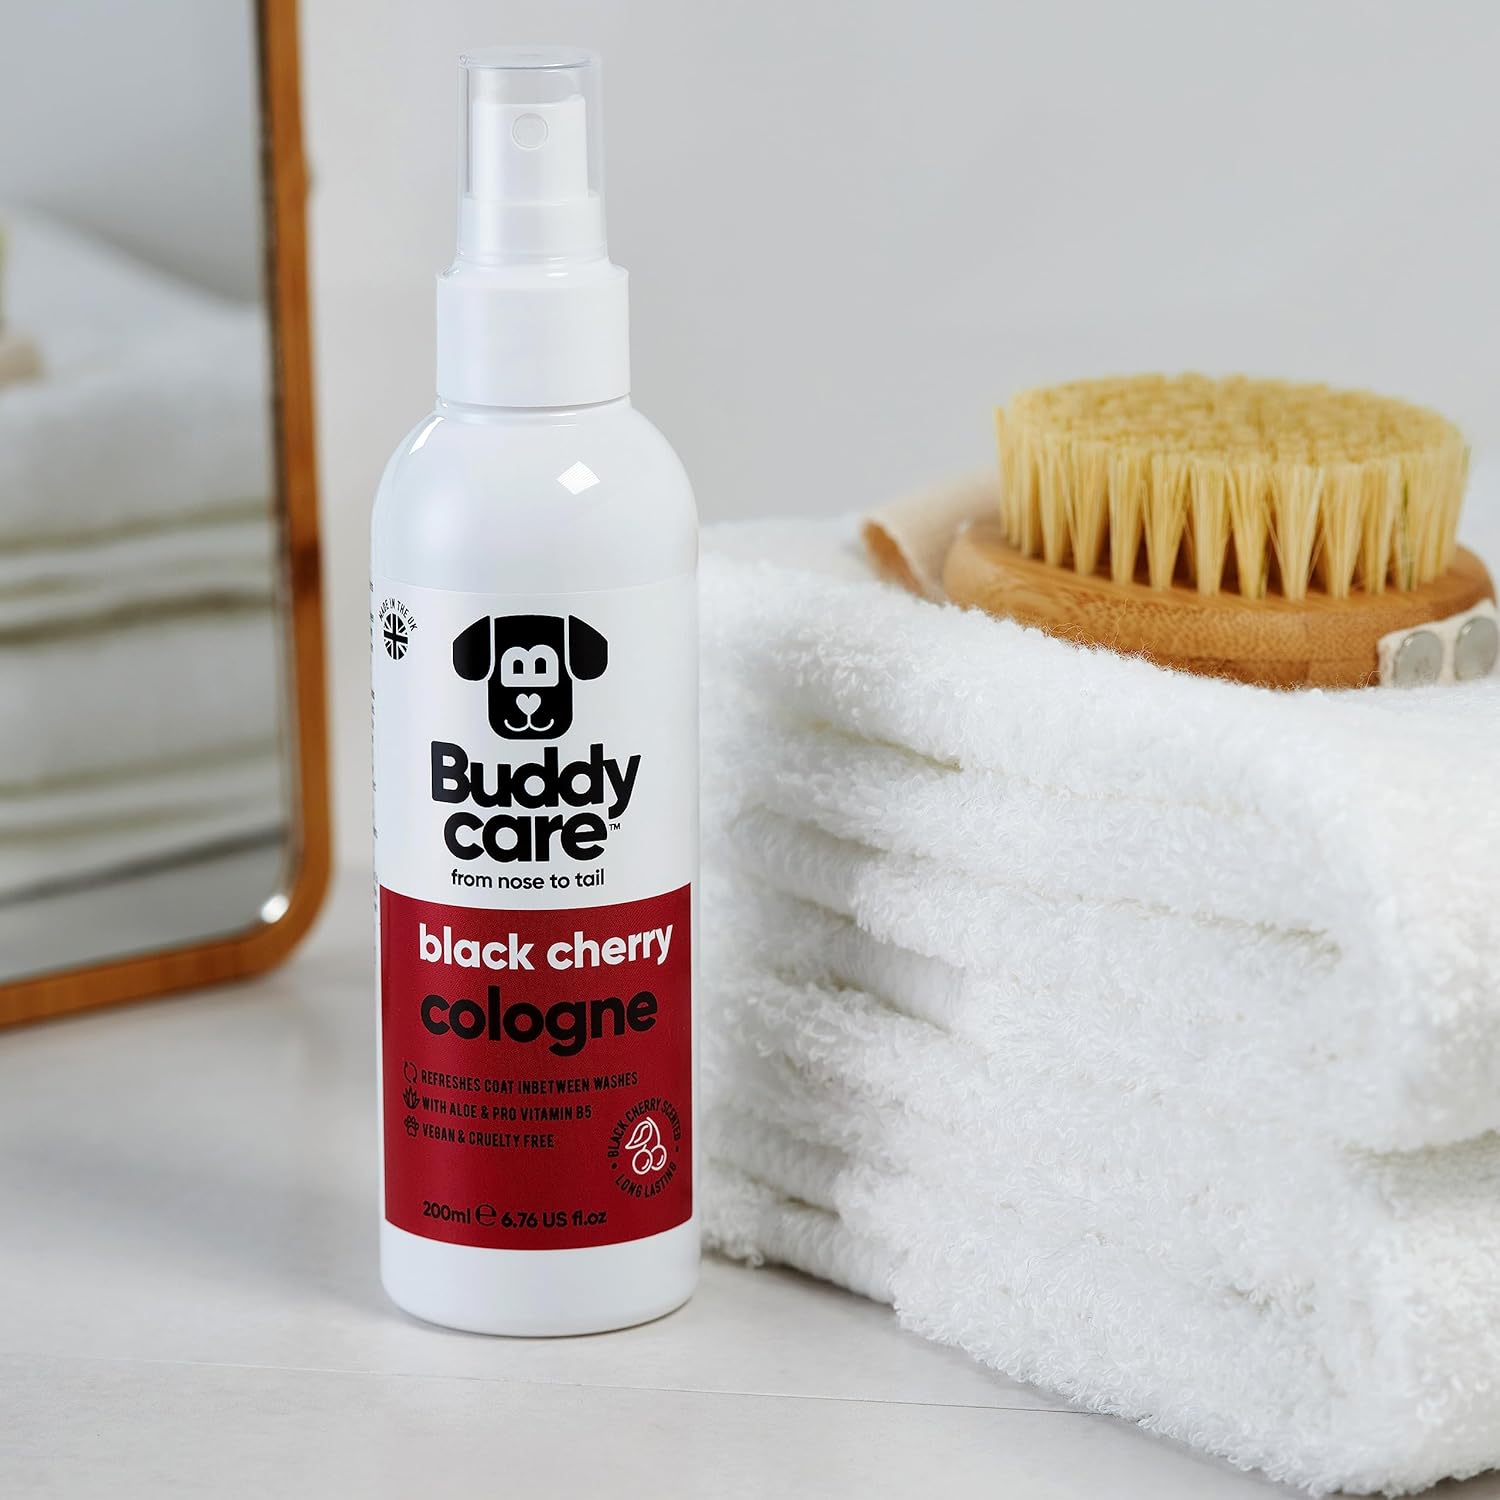 Buddycare Dog Cologne - Black Cherry - 200ml - Fruity and Bold Scented Dog Cologne - Refreshes Between Dog Washes :Pet Supplies